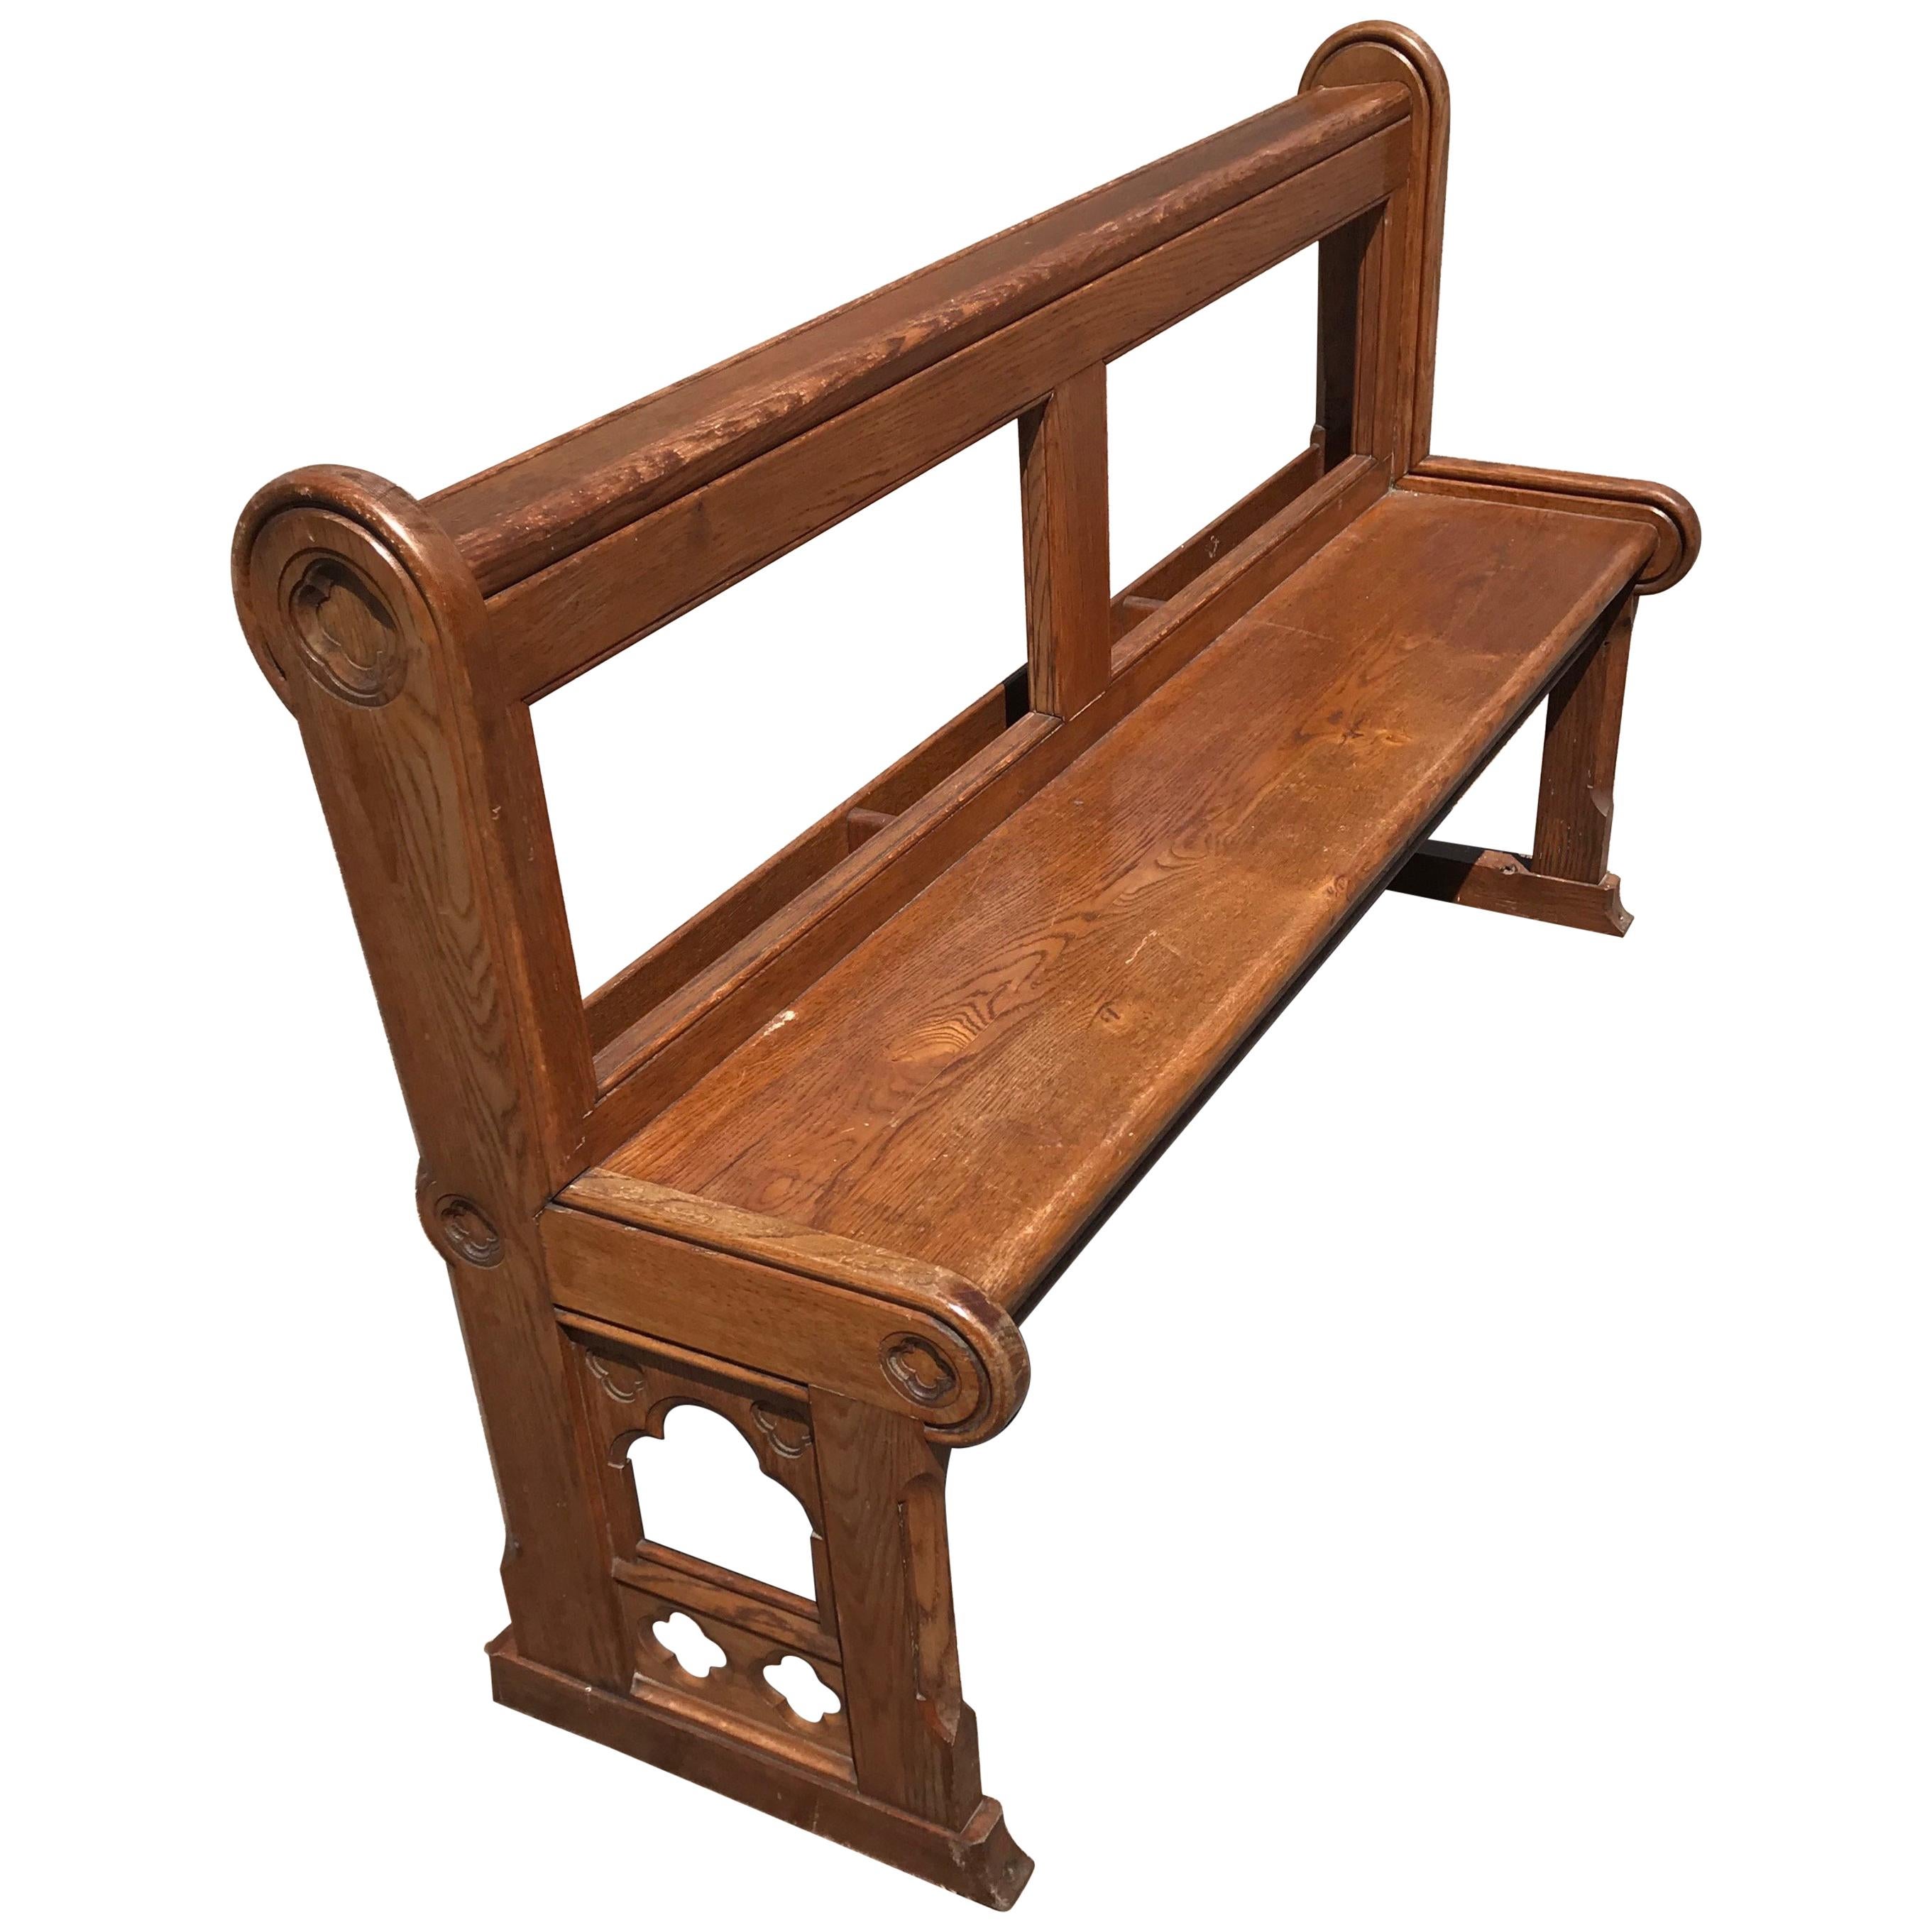 Antique and Handcrafted Gothic Revival Solid Tiger Oak Practical Hallway Bench For Sale